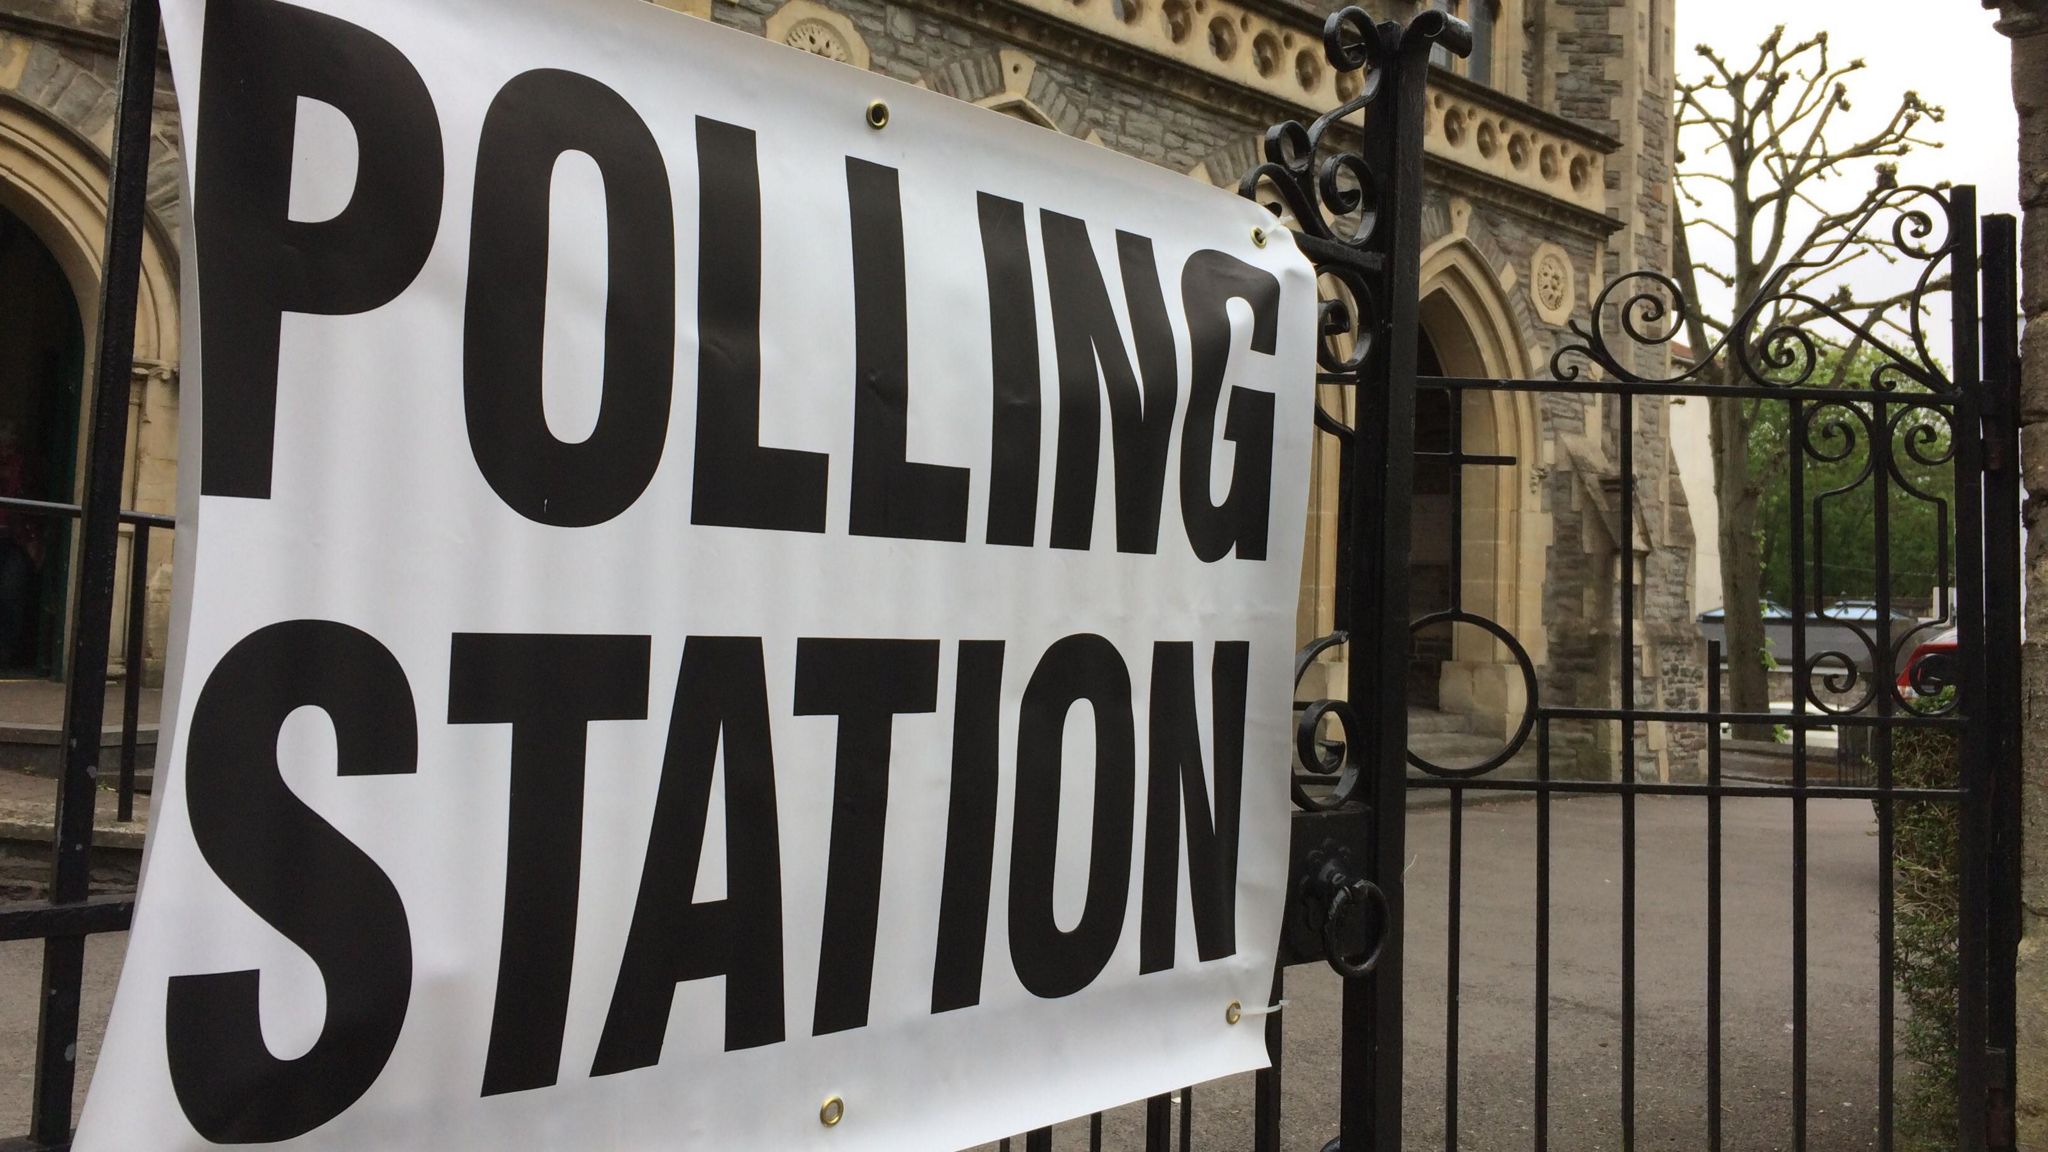 Polling station sign next to church in Bristol